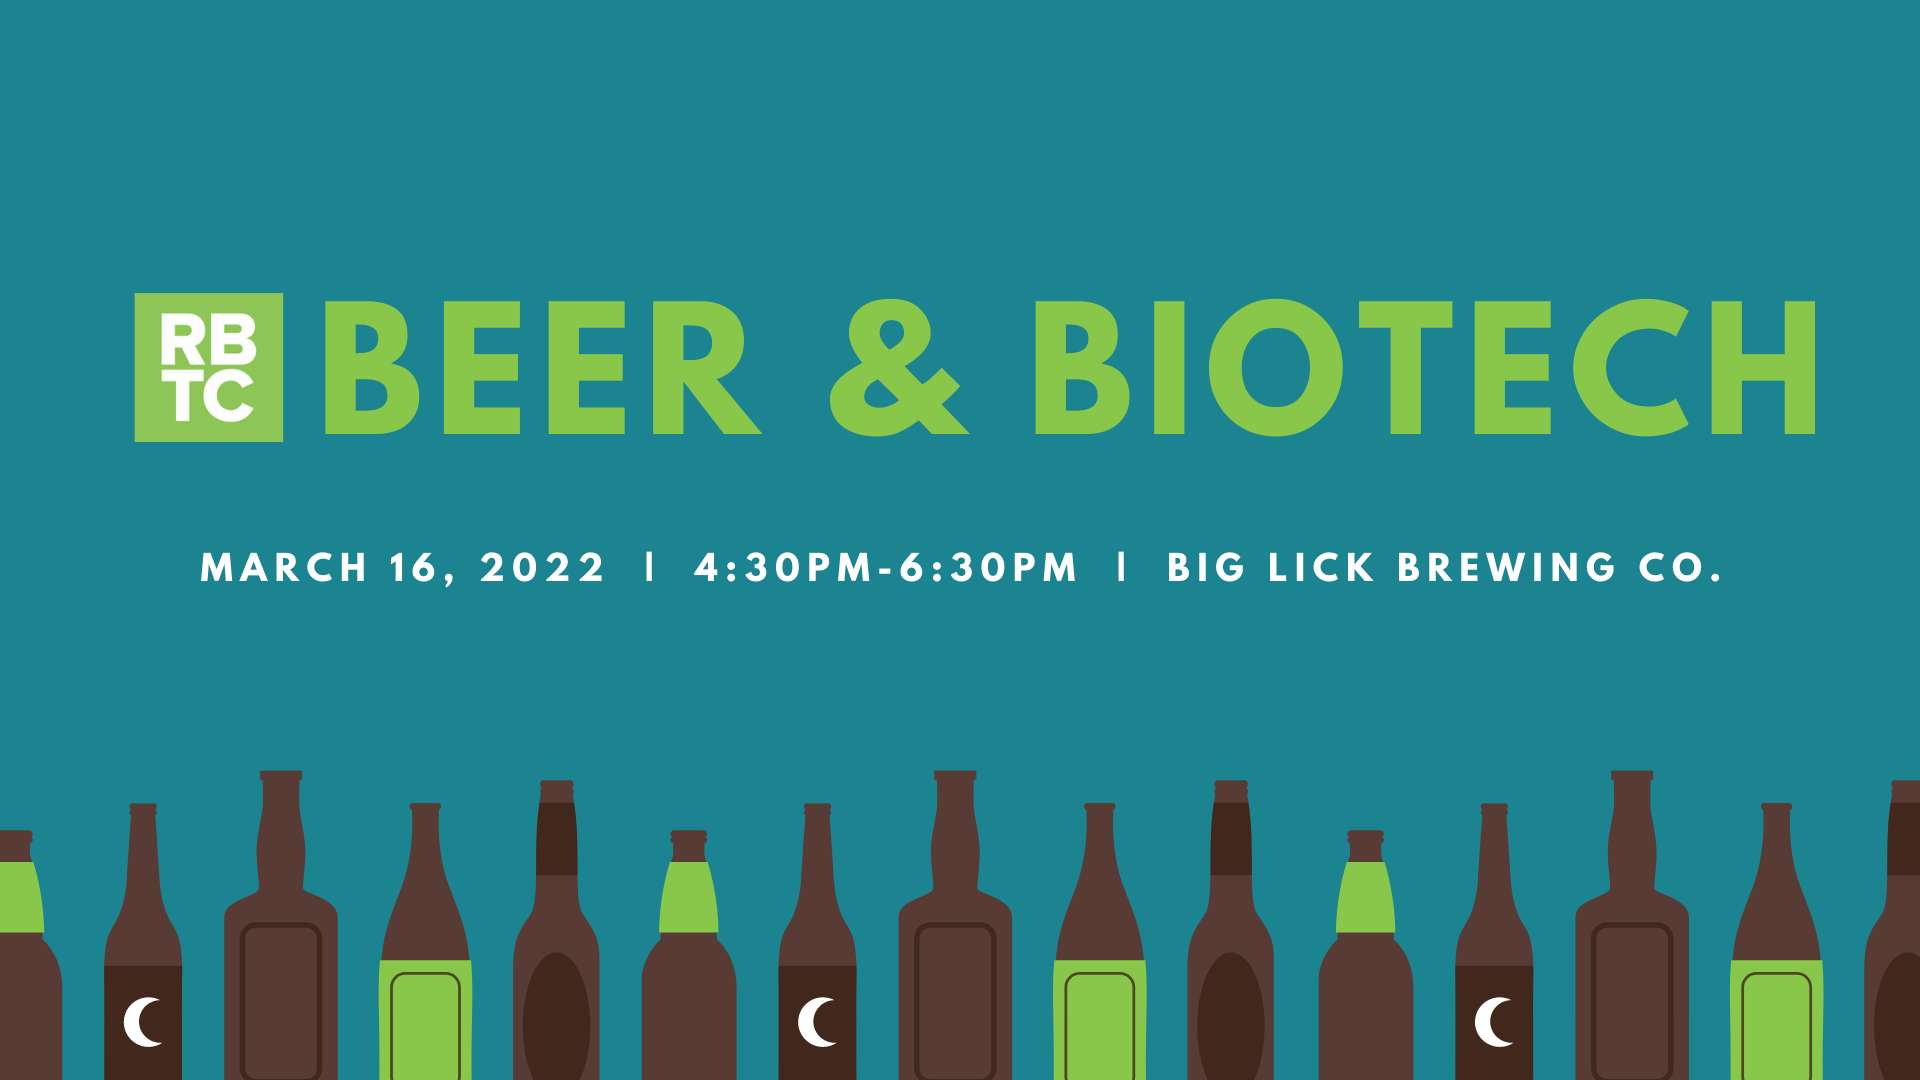 Beer & Biotech: The Future of Biotech in the Region